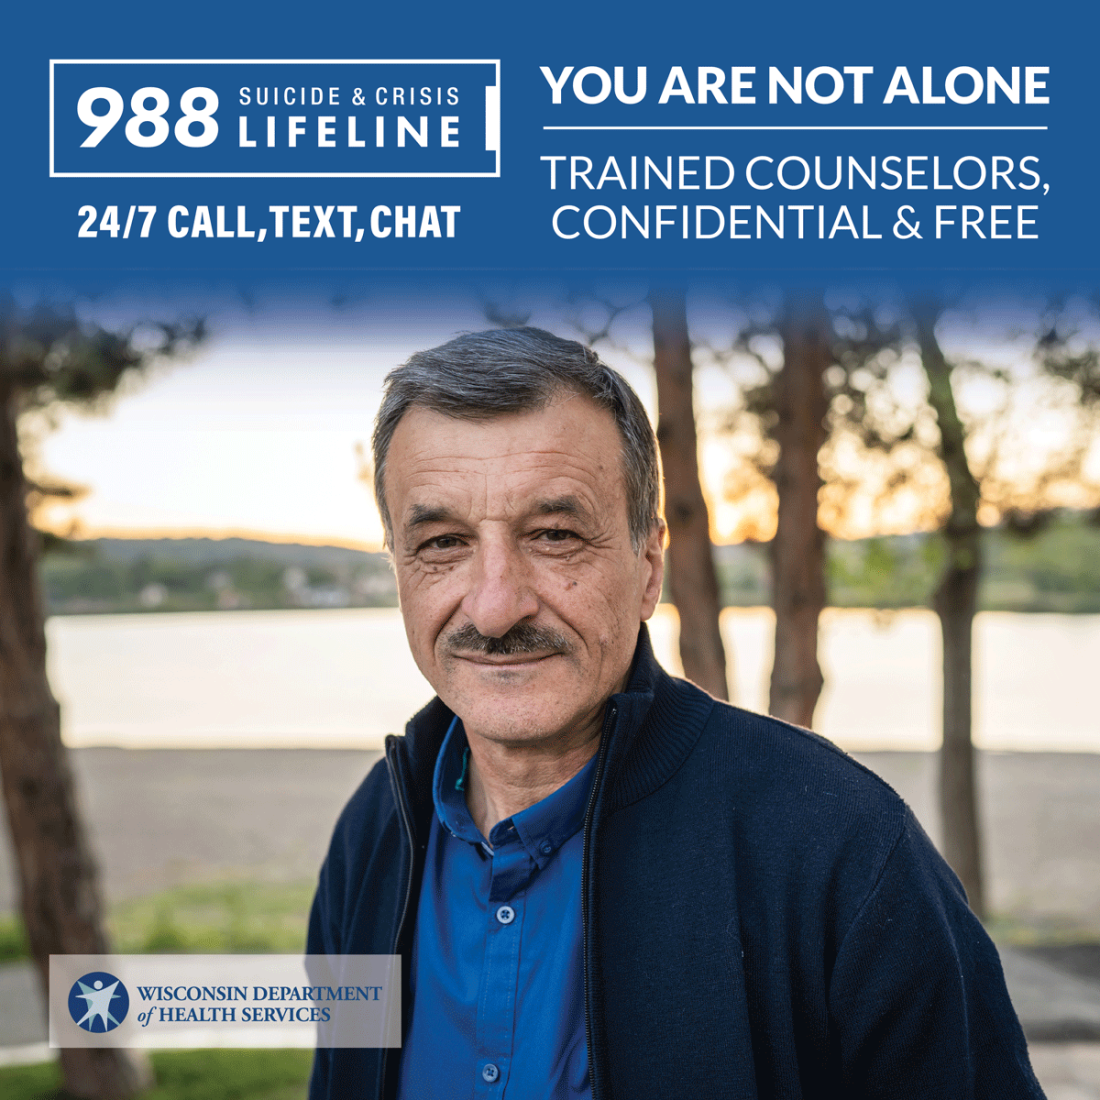 Adult - You are not alone - 988 Suicide & Crisis Lifeline